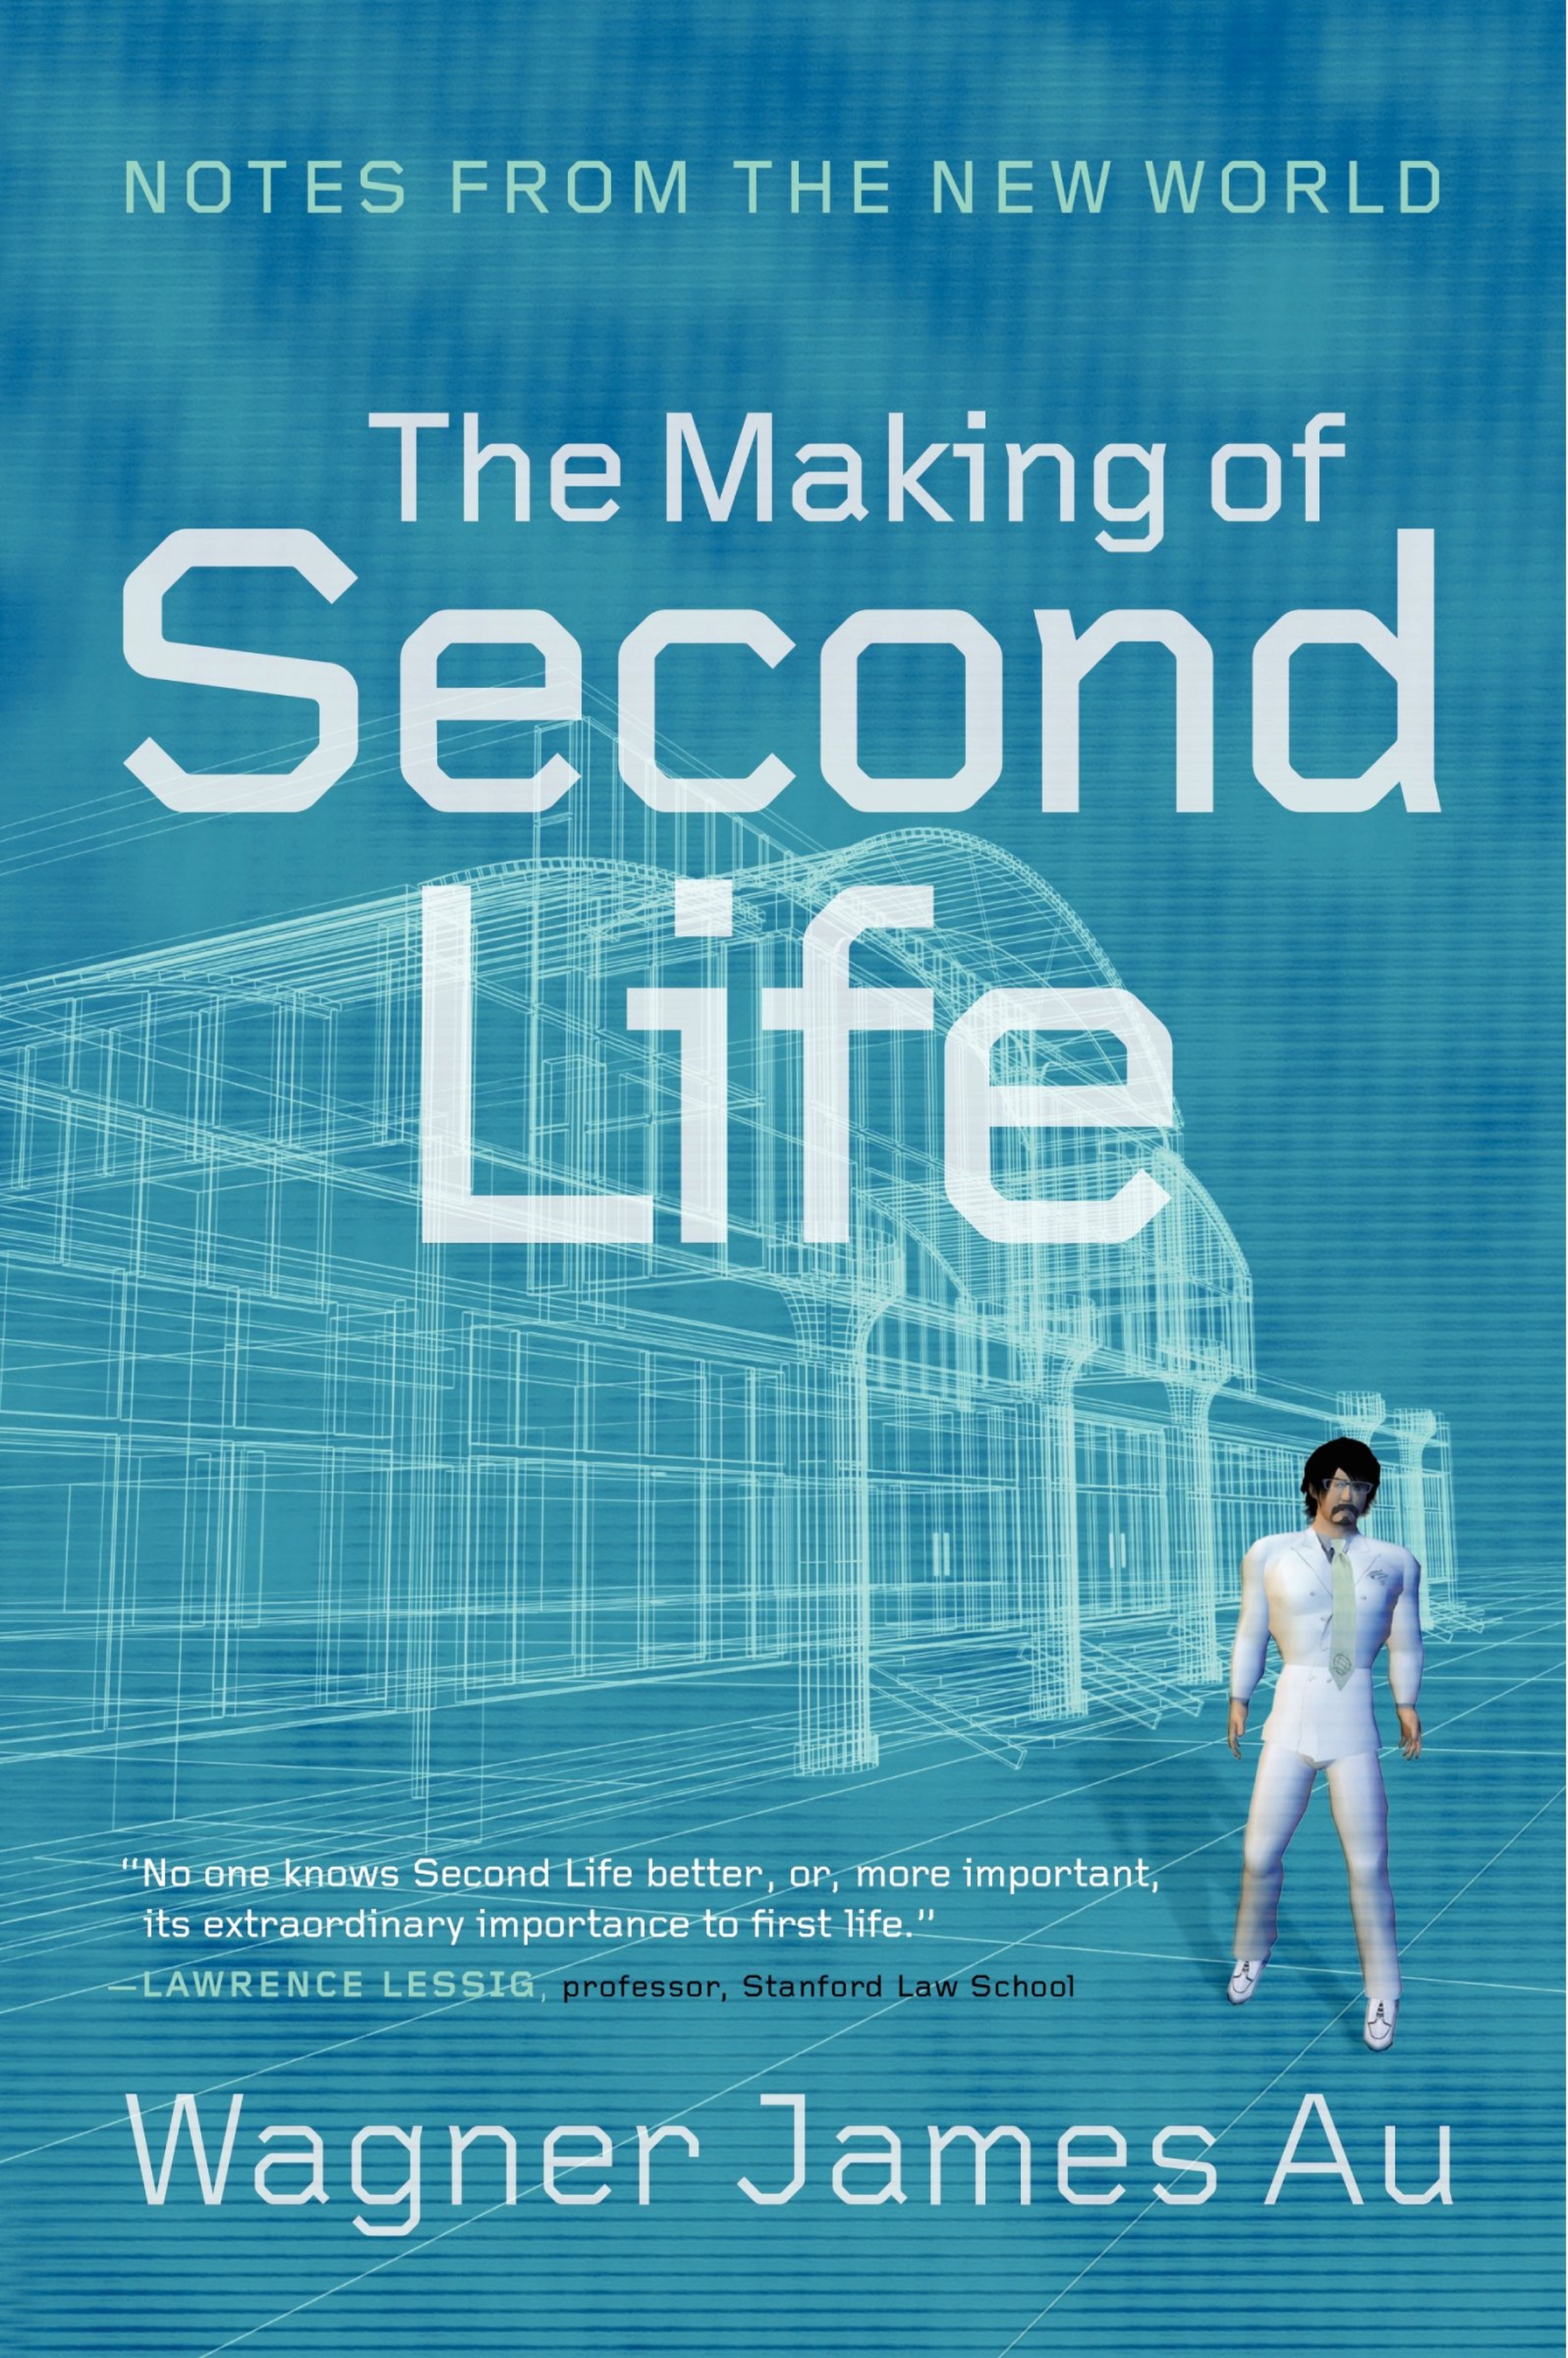 'The Making of Second Life'.